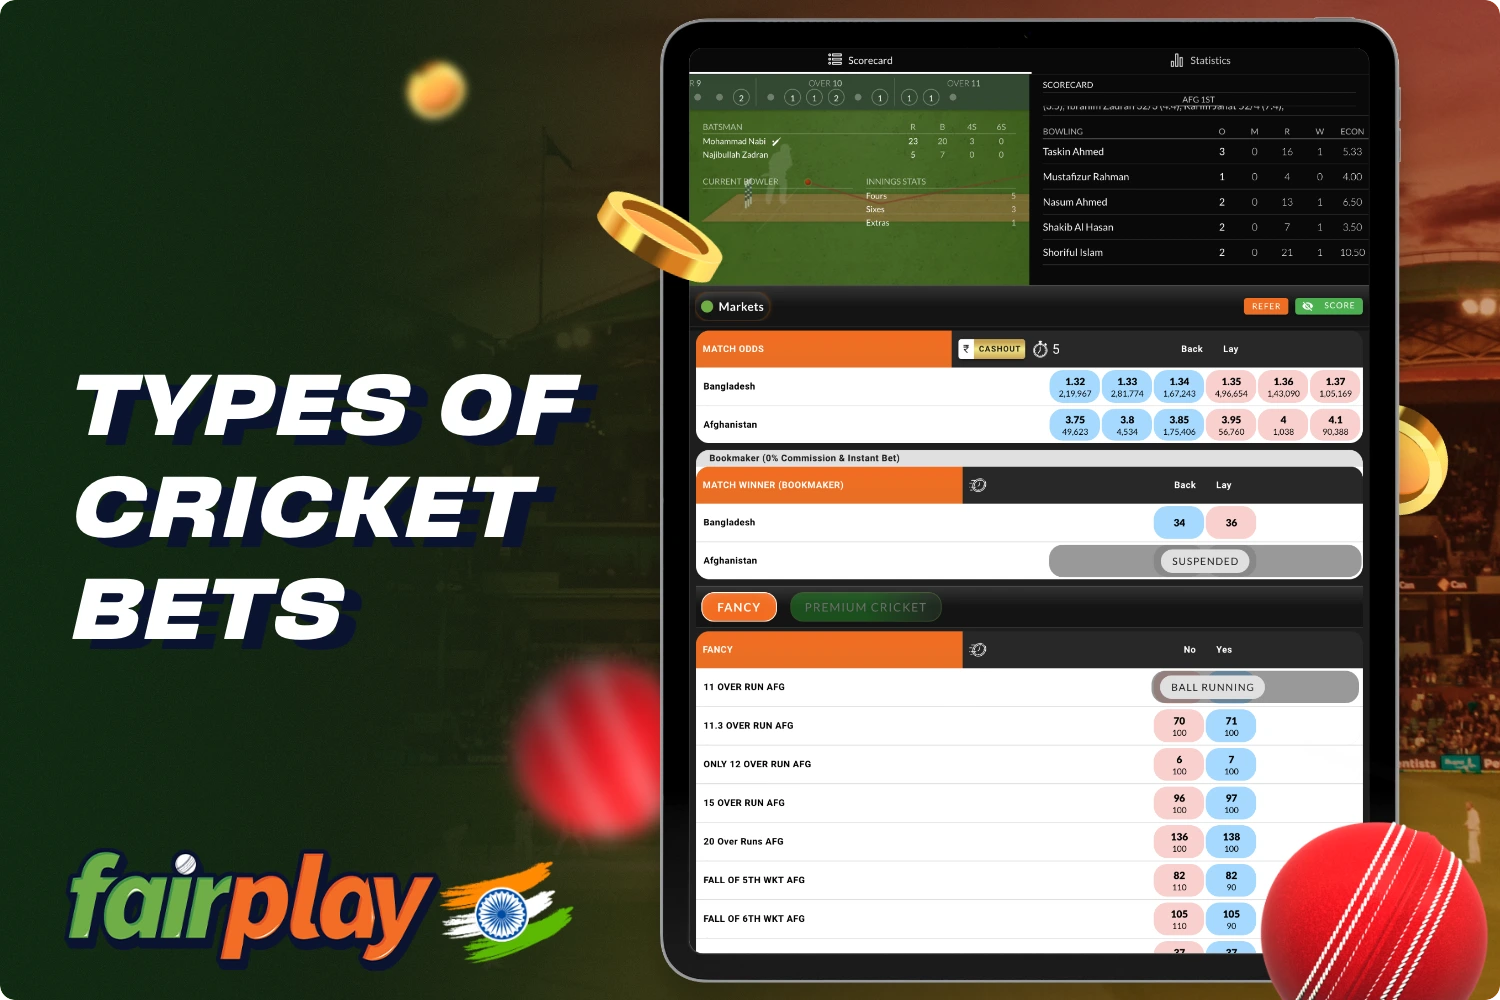 Different types of cricket bets are available at Fairplay